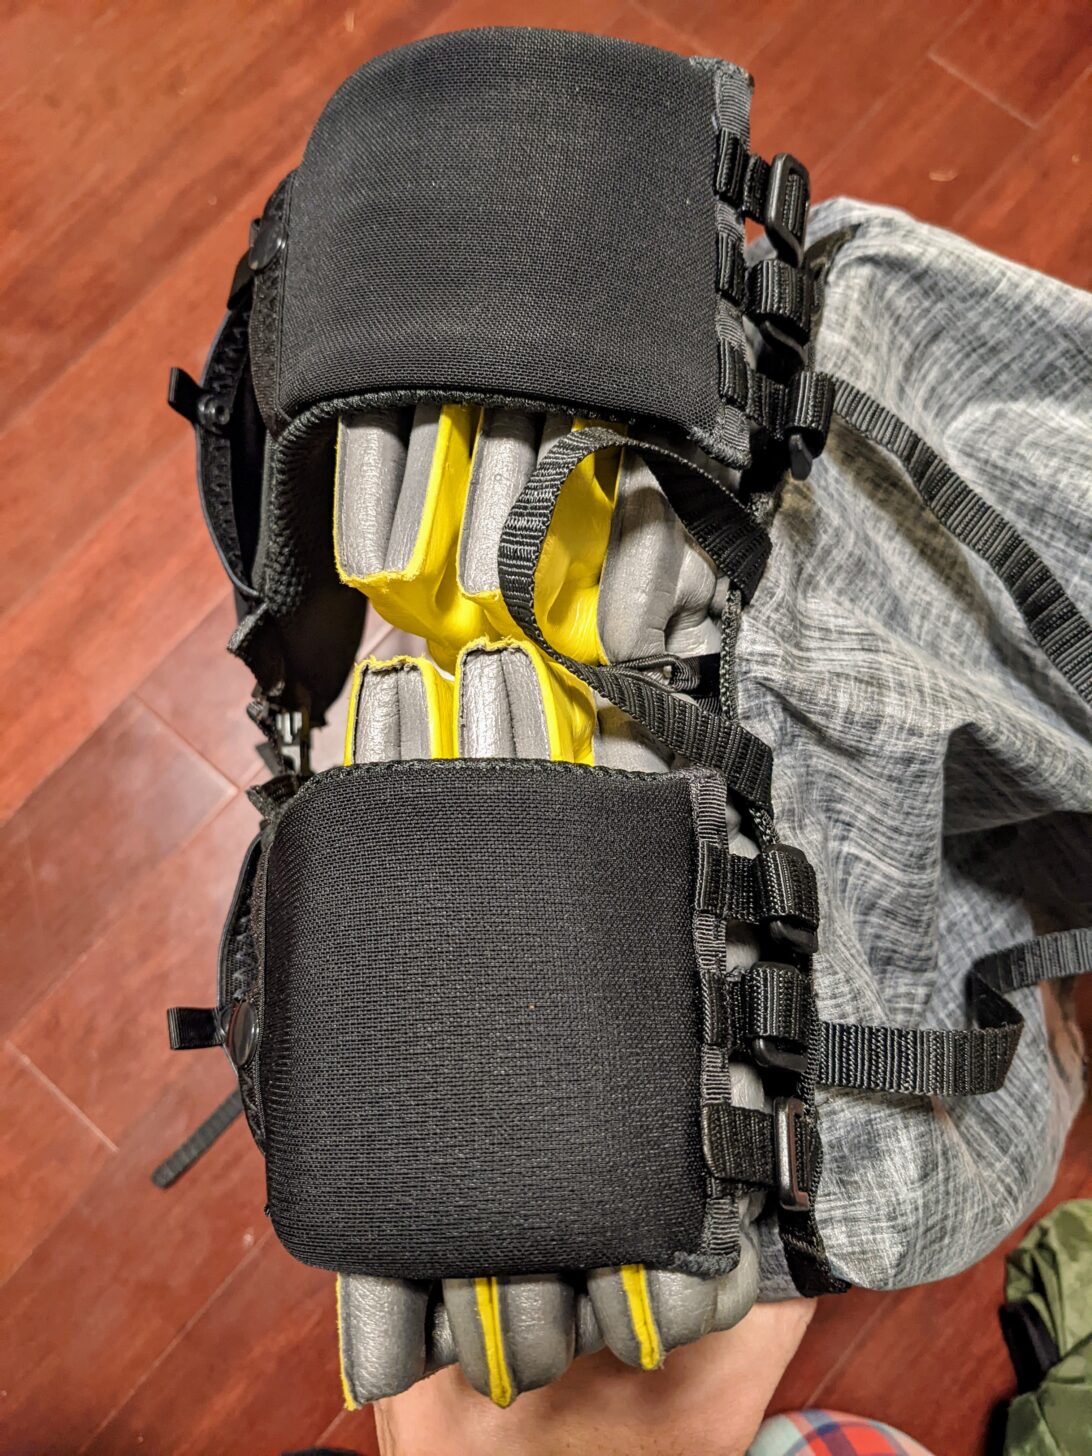 a shot from above looking down at the top of the Nashville Pack Cutaway backpack. The shoulder straps are resting on top of a pad which is folded and sitting against the back panel of the pack.